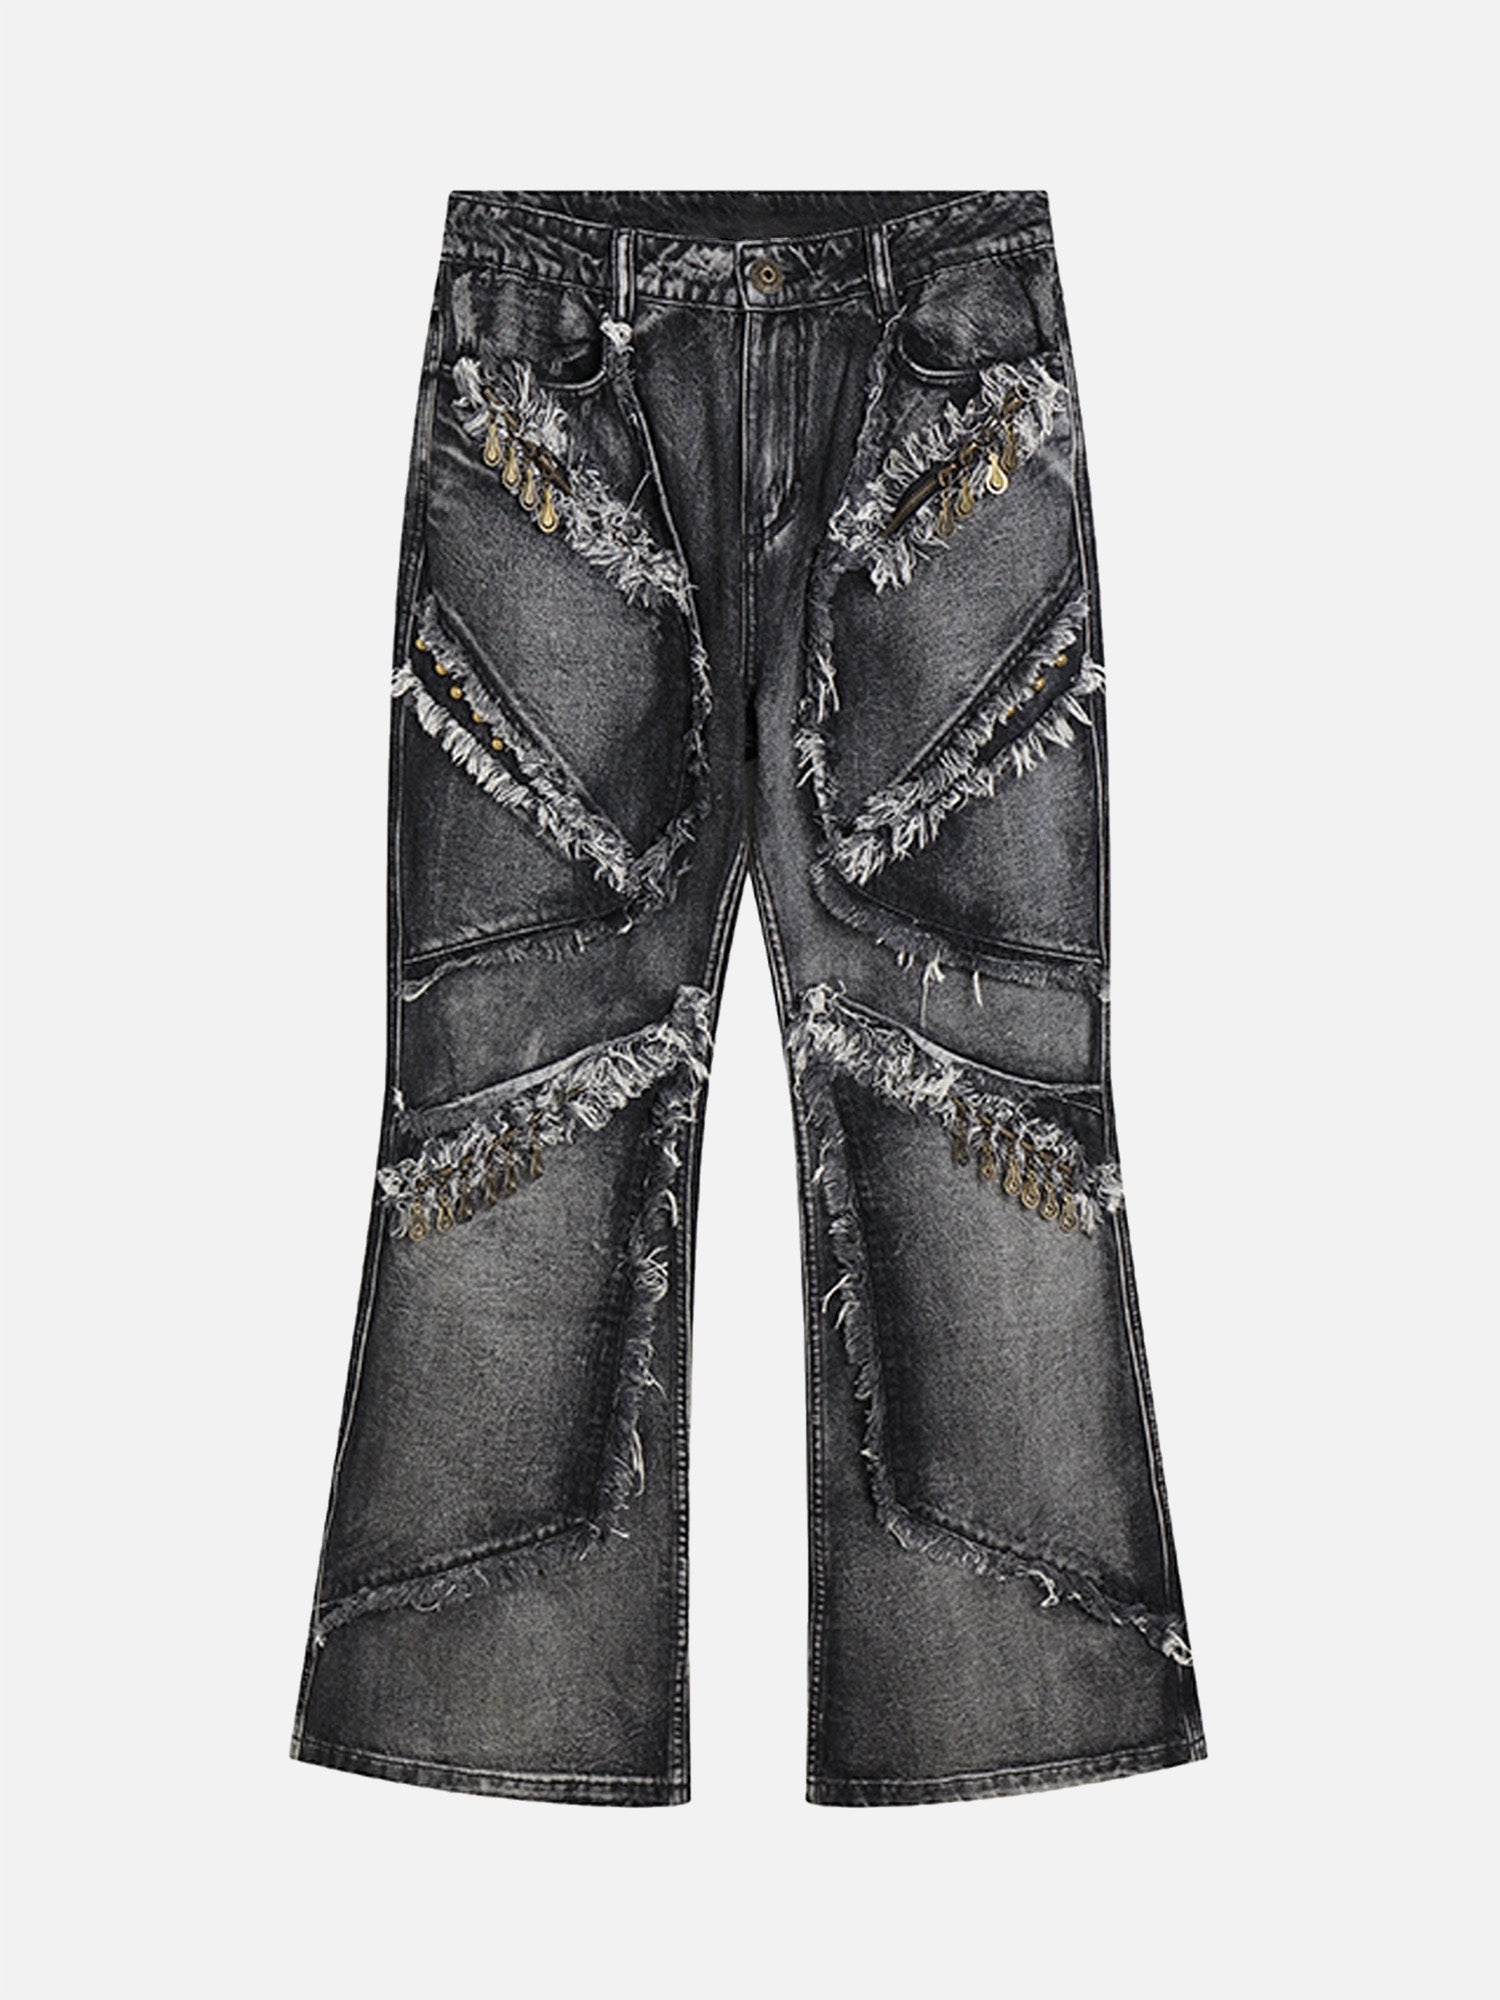 Retro Deconstructed Multi-Pull Heavy Duty Washed Distressed Tassel Micro-Large Jeans